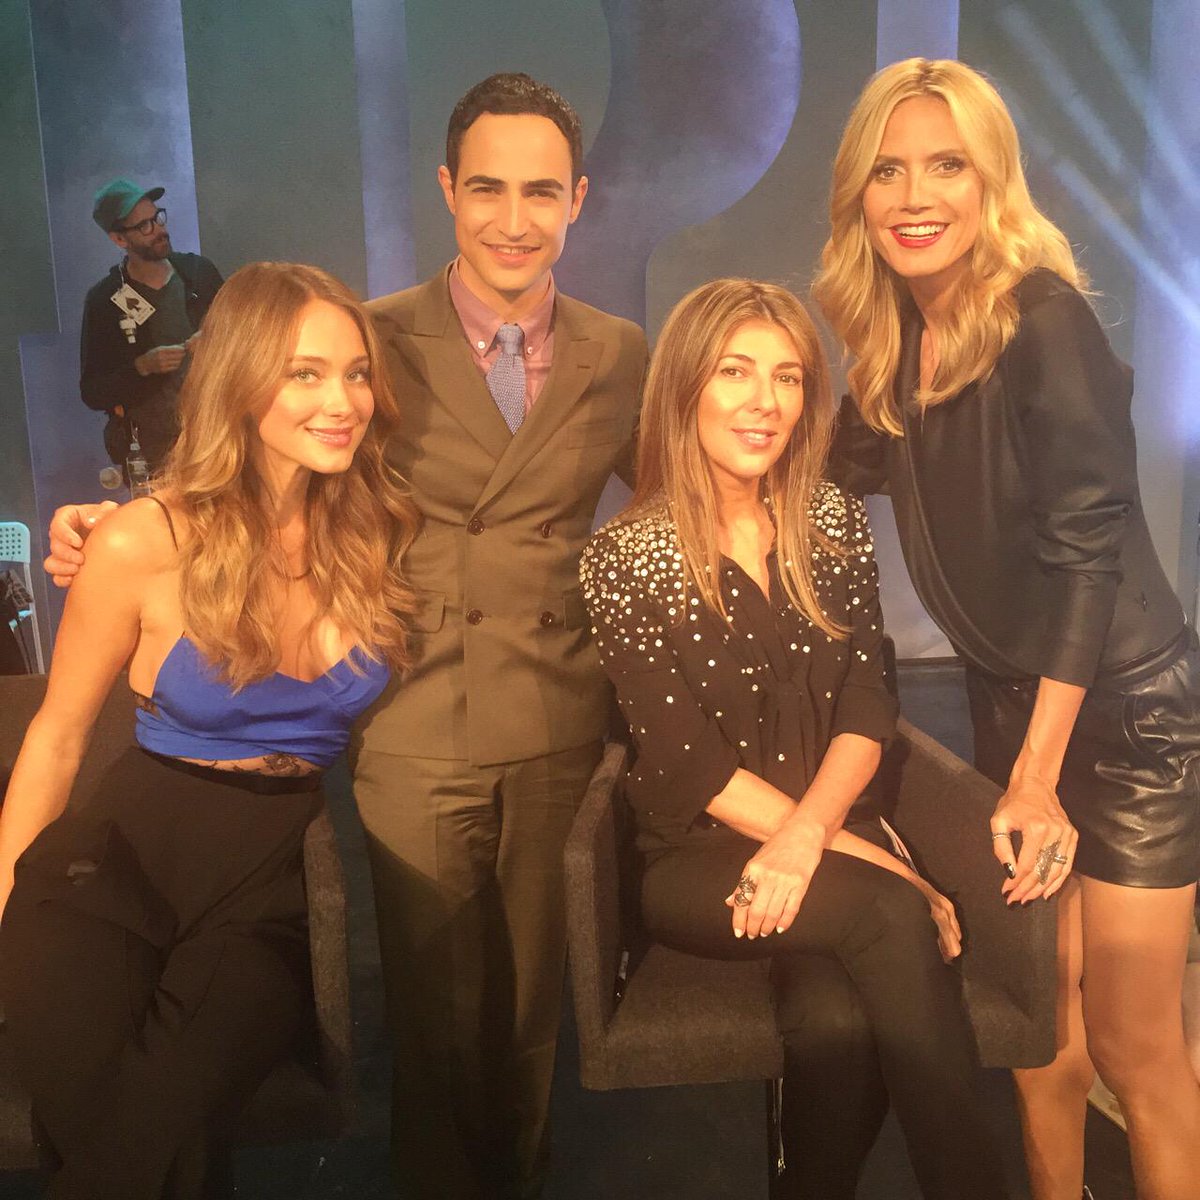 . @ProjectRunway premieres tonight on @lifetimetv! Which designers r your early favorites? @hanni_davis is our guest! http://t.co/6qX7jdejBB